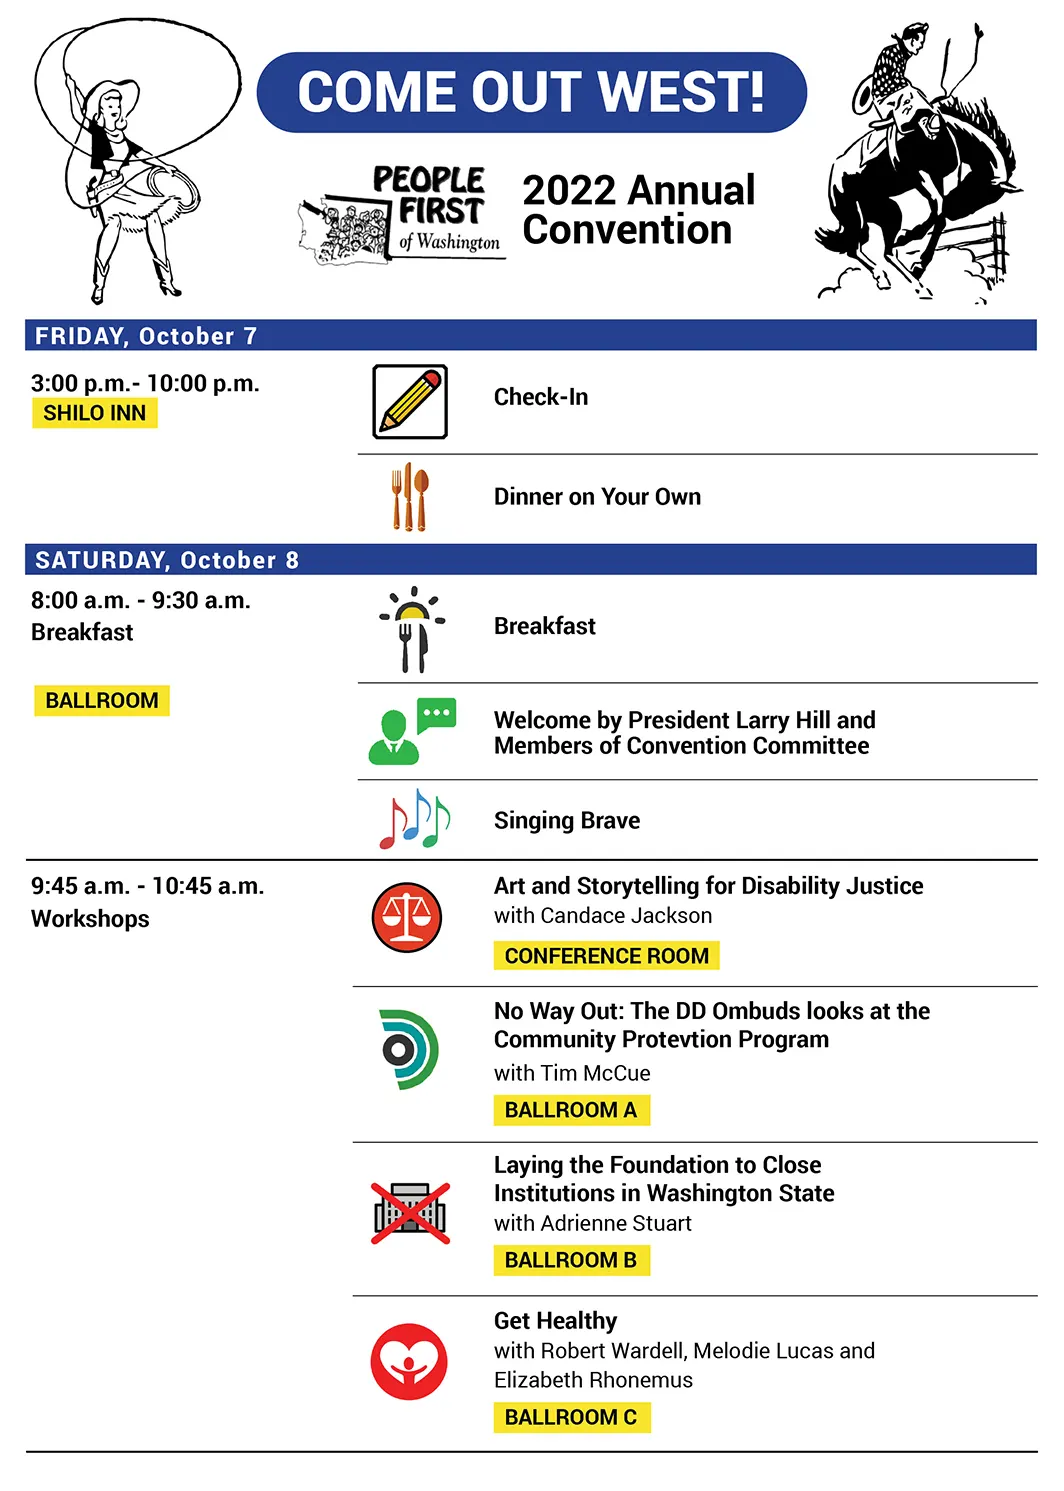 This link opens the complete convention schedule PDF which allows you view and print if desired. 